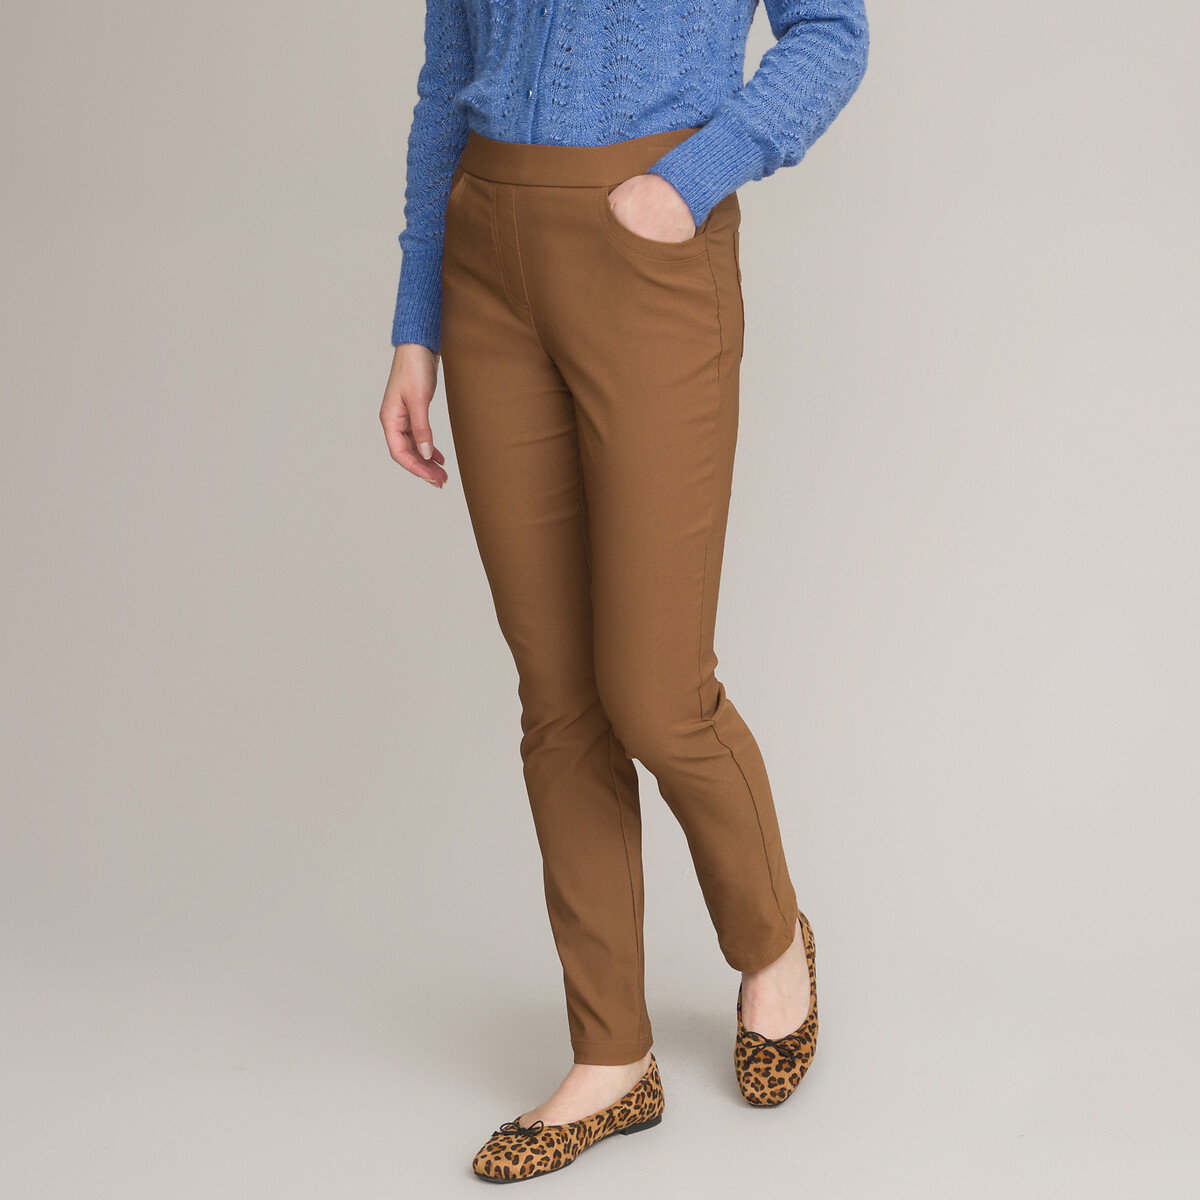 Straight Pull-On Trousers, Length 30.5"